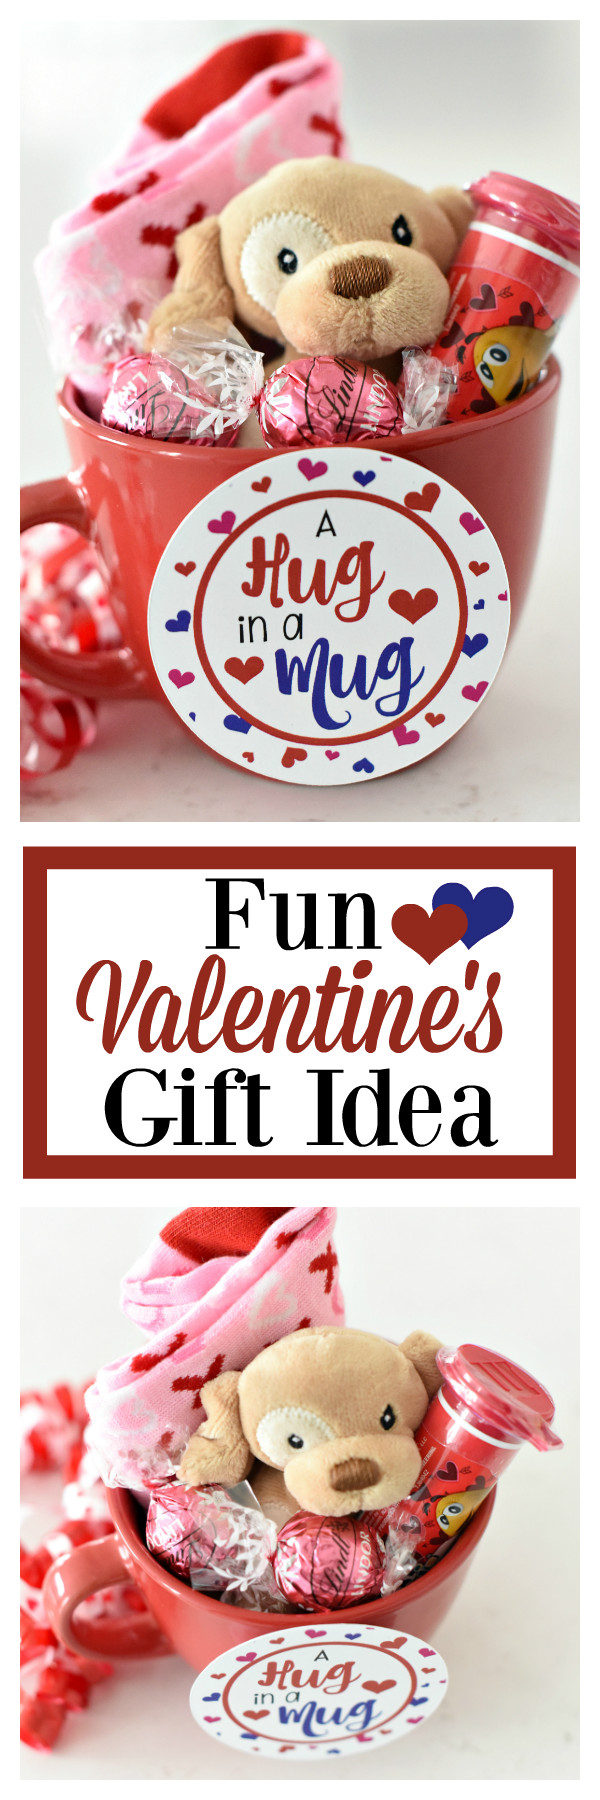 Will You Be My Valentine Gift Ideas
 Fun Valentines Gift Idea for Kids – Fun Squared